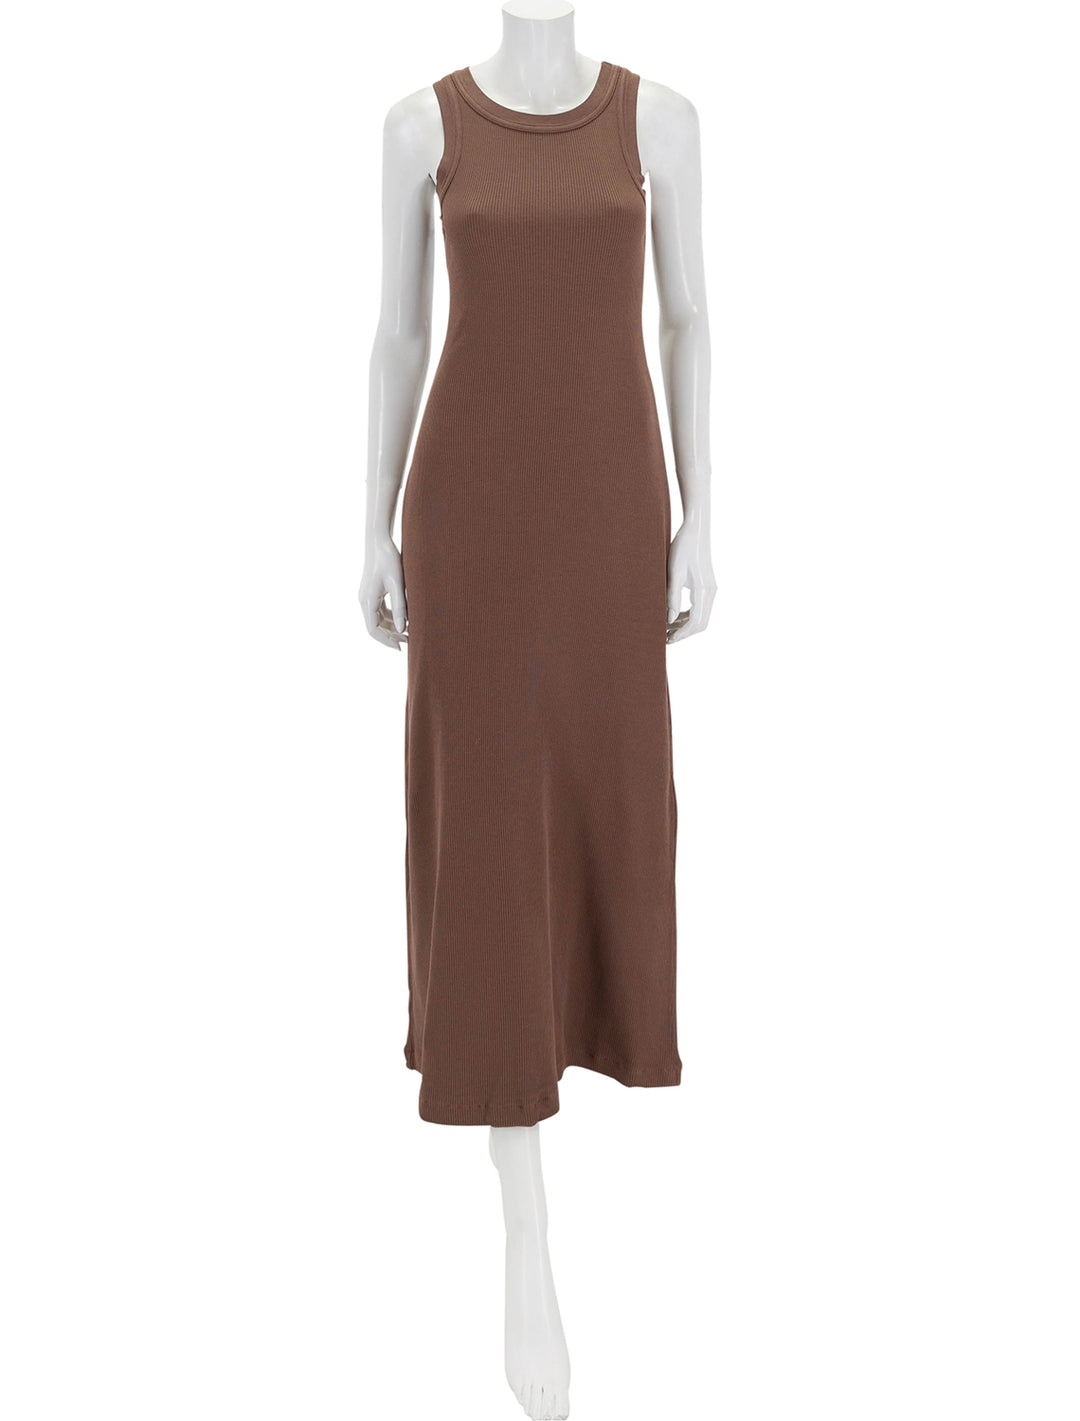 Front view of Citizens of Humanity's isabel tank dress in mink.